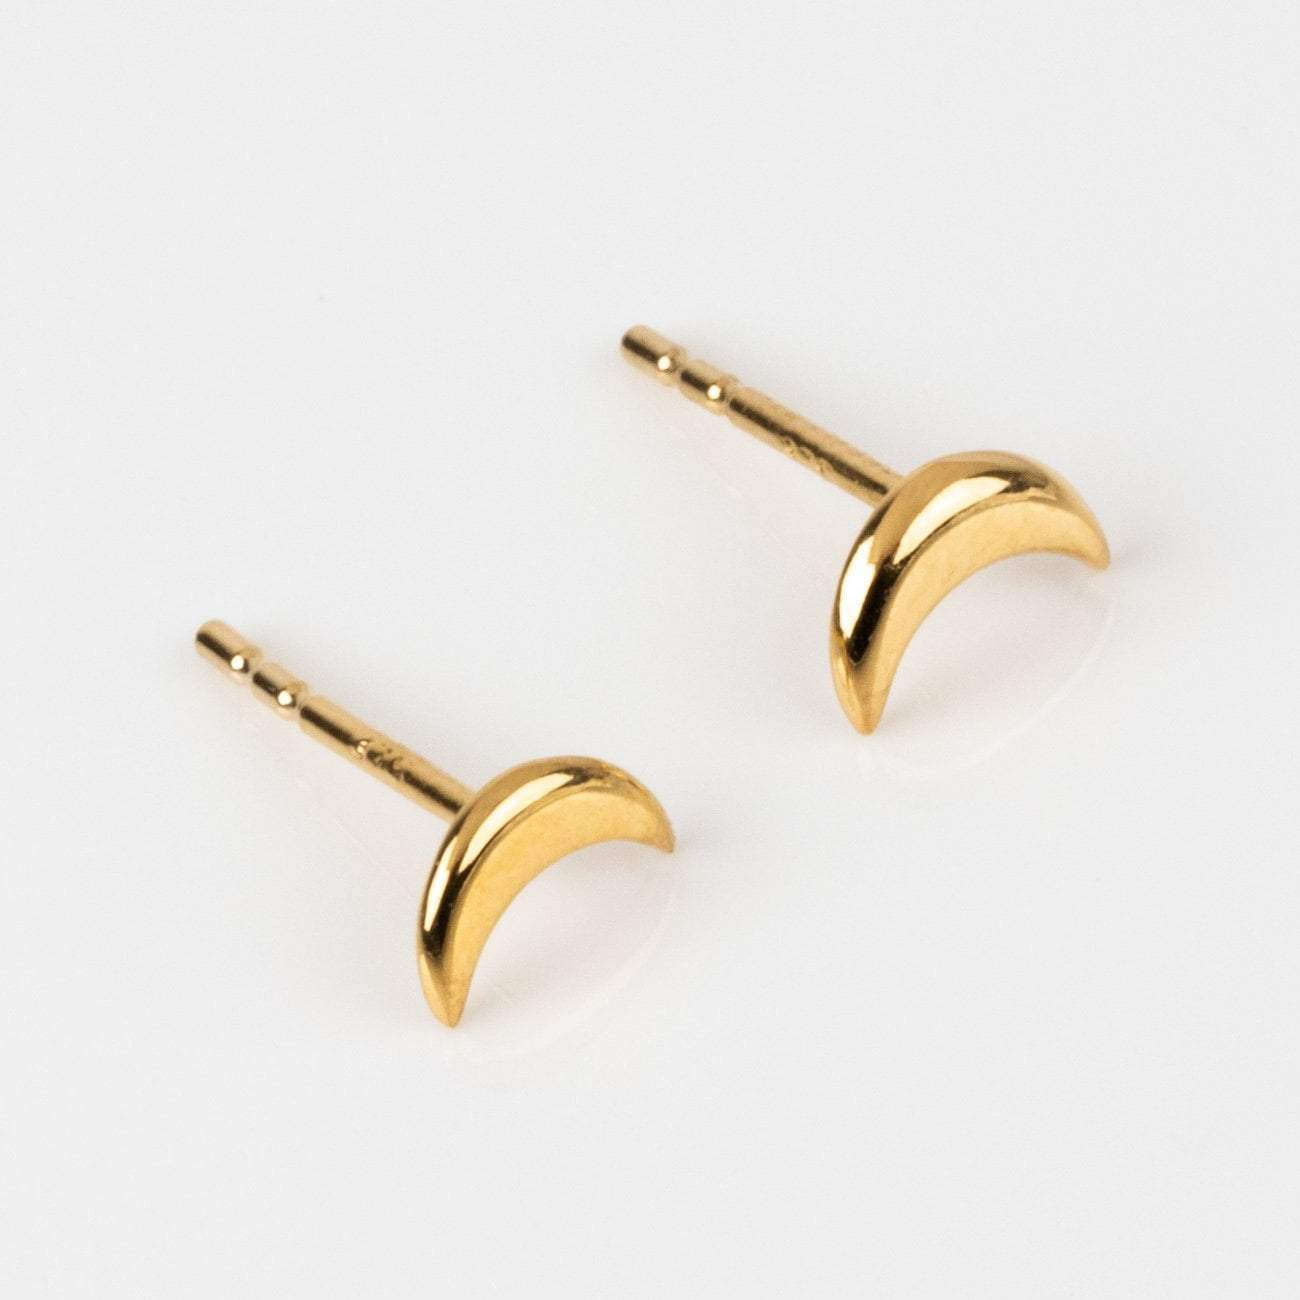 Solid Gold Earring Backings - Local Eclectic